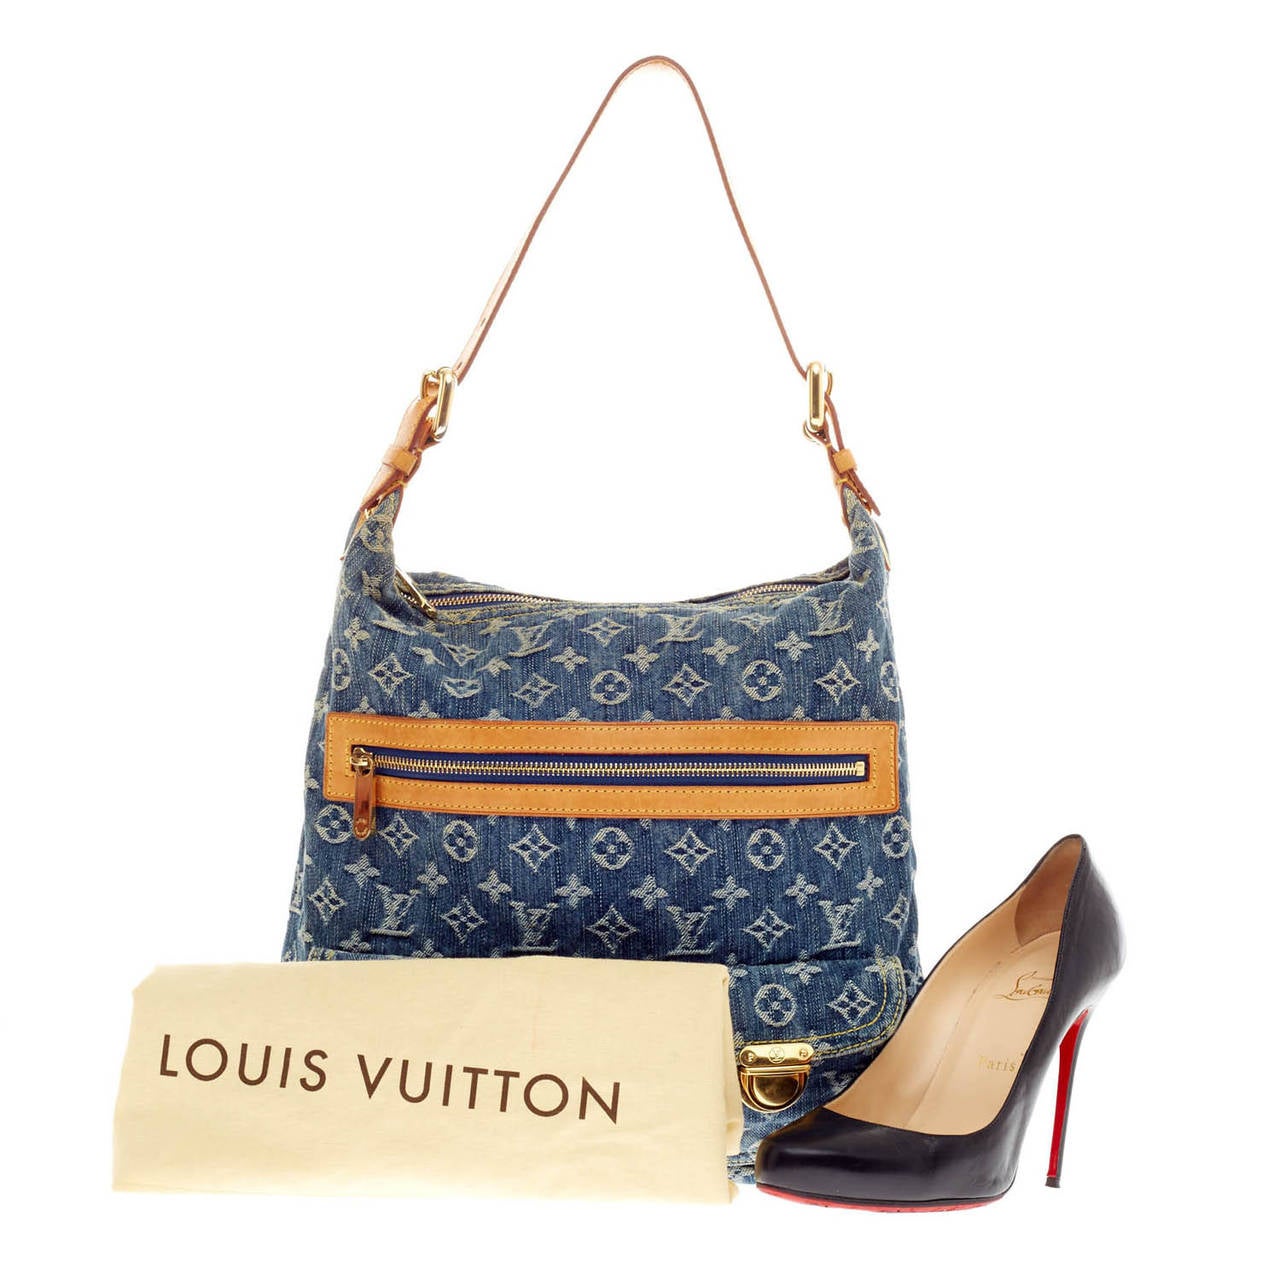 This authentic Louis Vuitton Baggy Denim size GM is a fresh twist on an iconic design that will stylishly complement a casual look. Crafted from monogram print in washed denim fabric, this bag features vachetta leather trim, yellow contrast